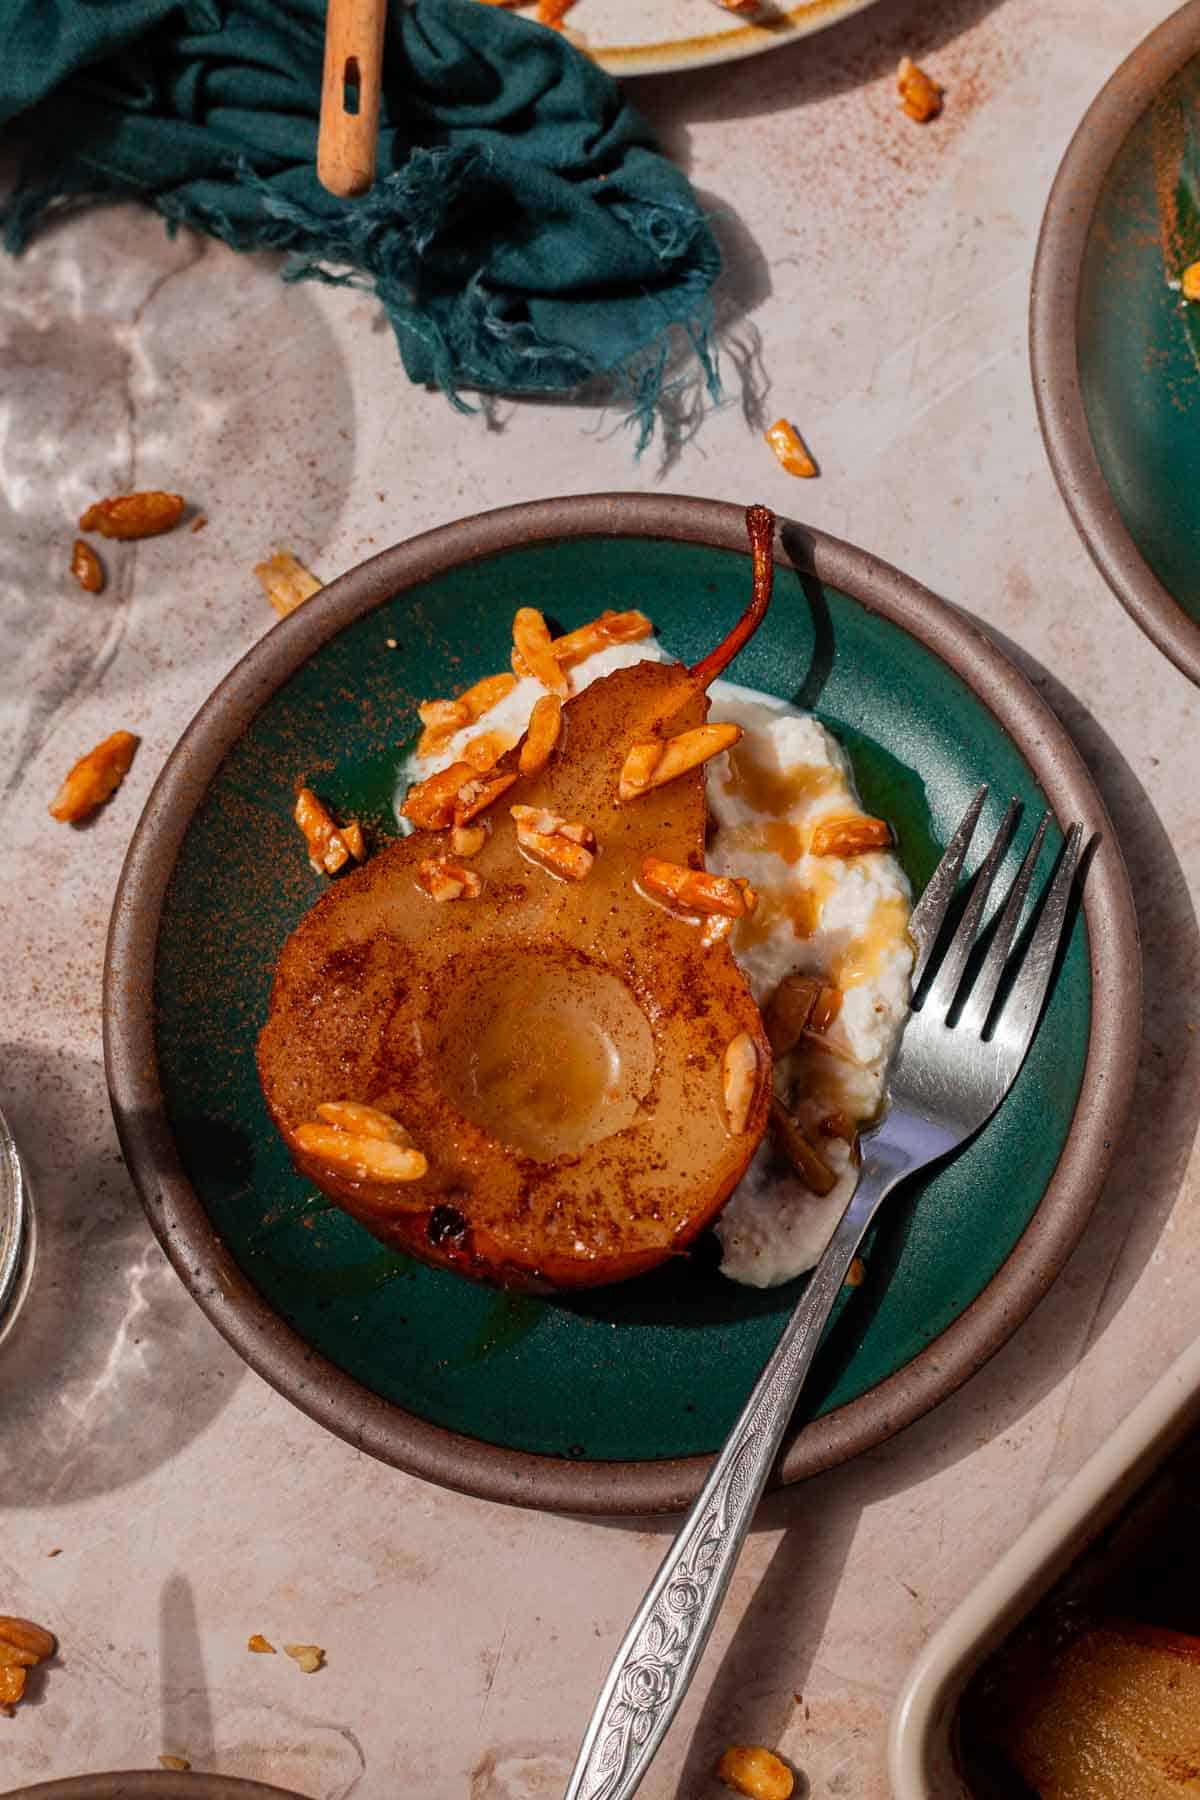 Teal plate with a large spoonful of ricotta cheese, a baked pear resting with its cut side facing up, and candied almonds sprinkled over top. It's all finished with a drizzle of honey.